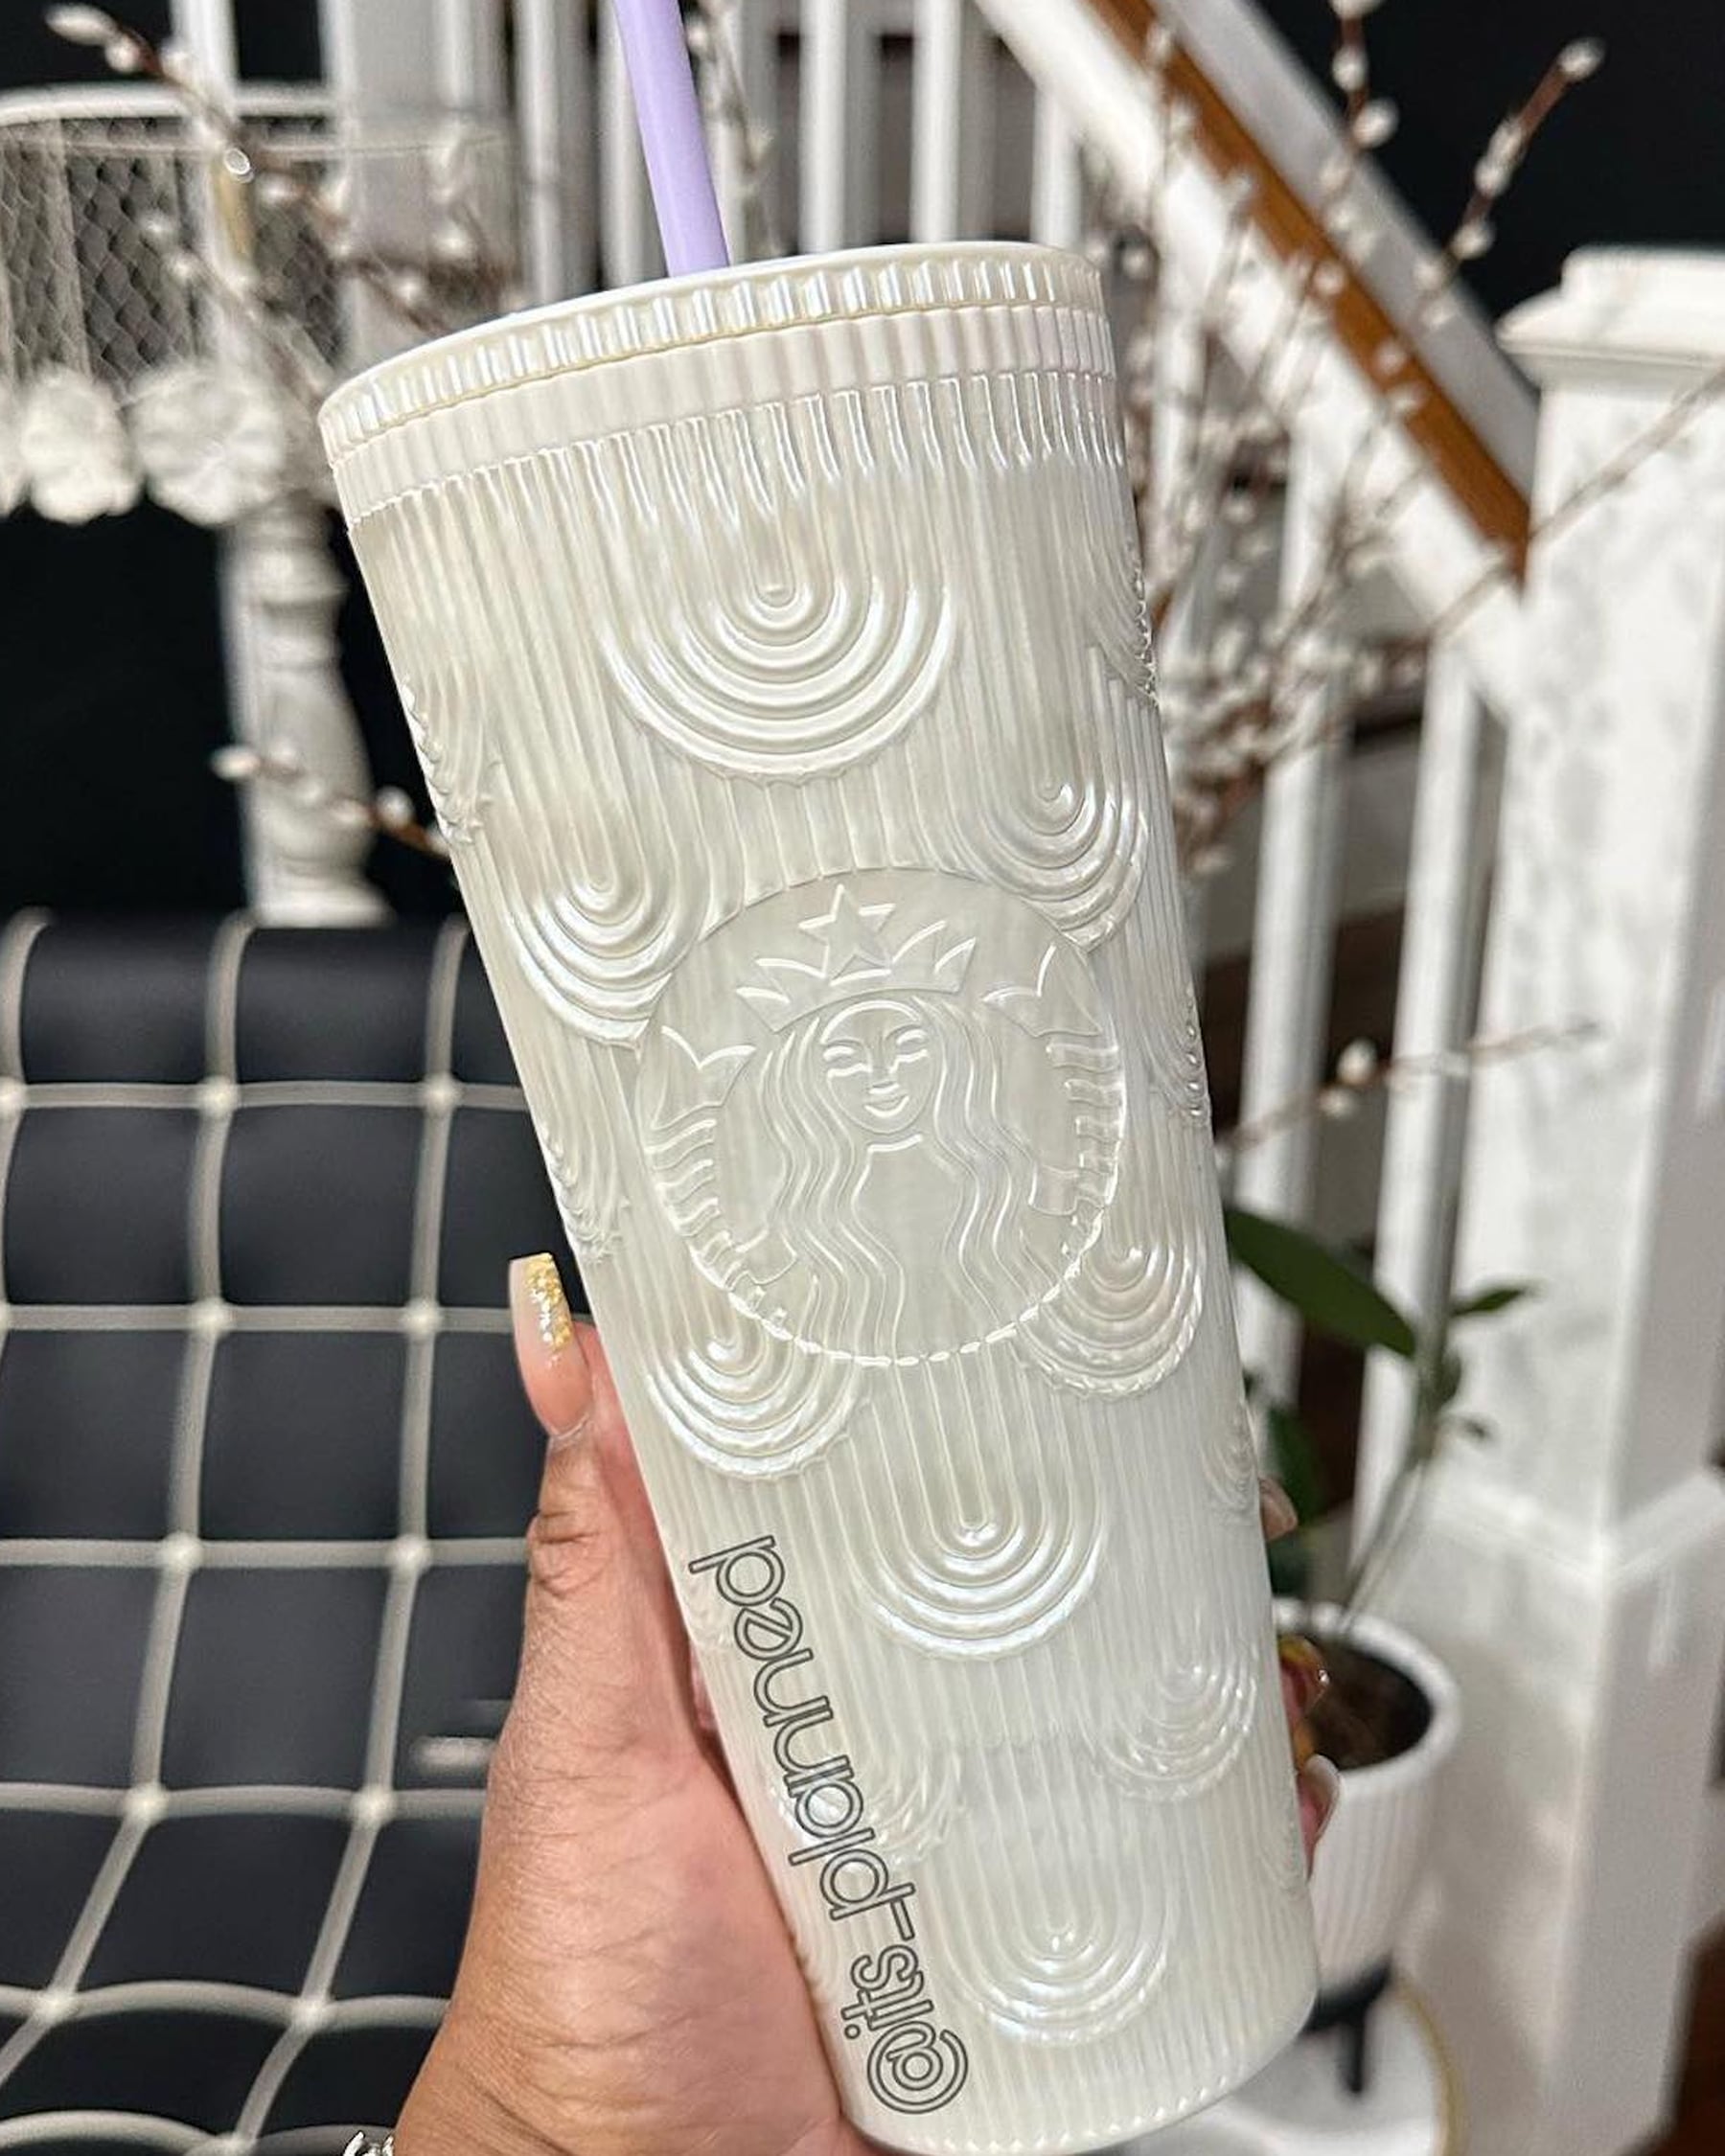 A New Starbucks Pearl Ivory Cup Is Going Viral on TikTok